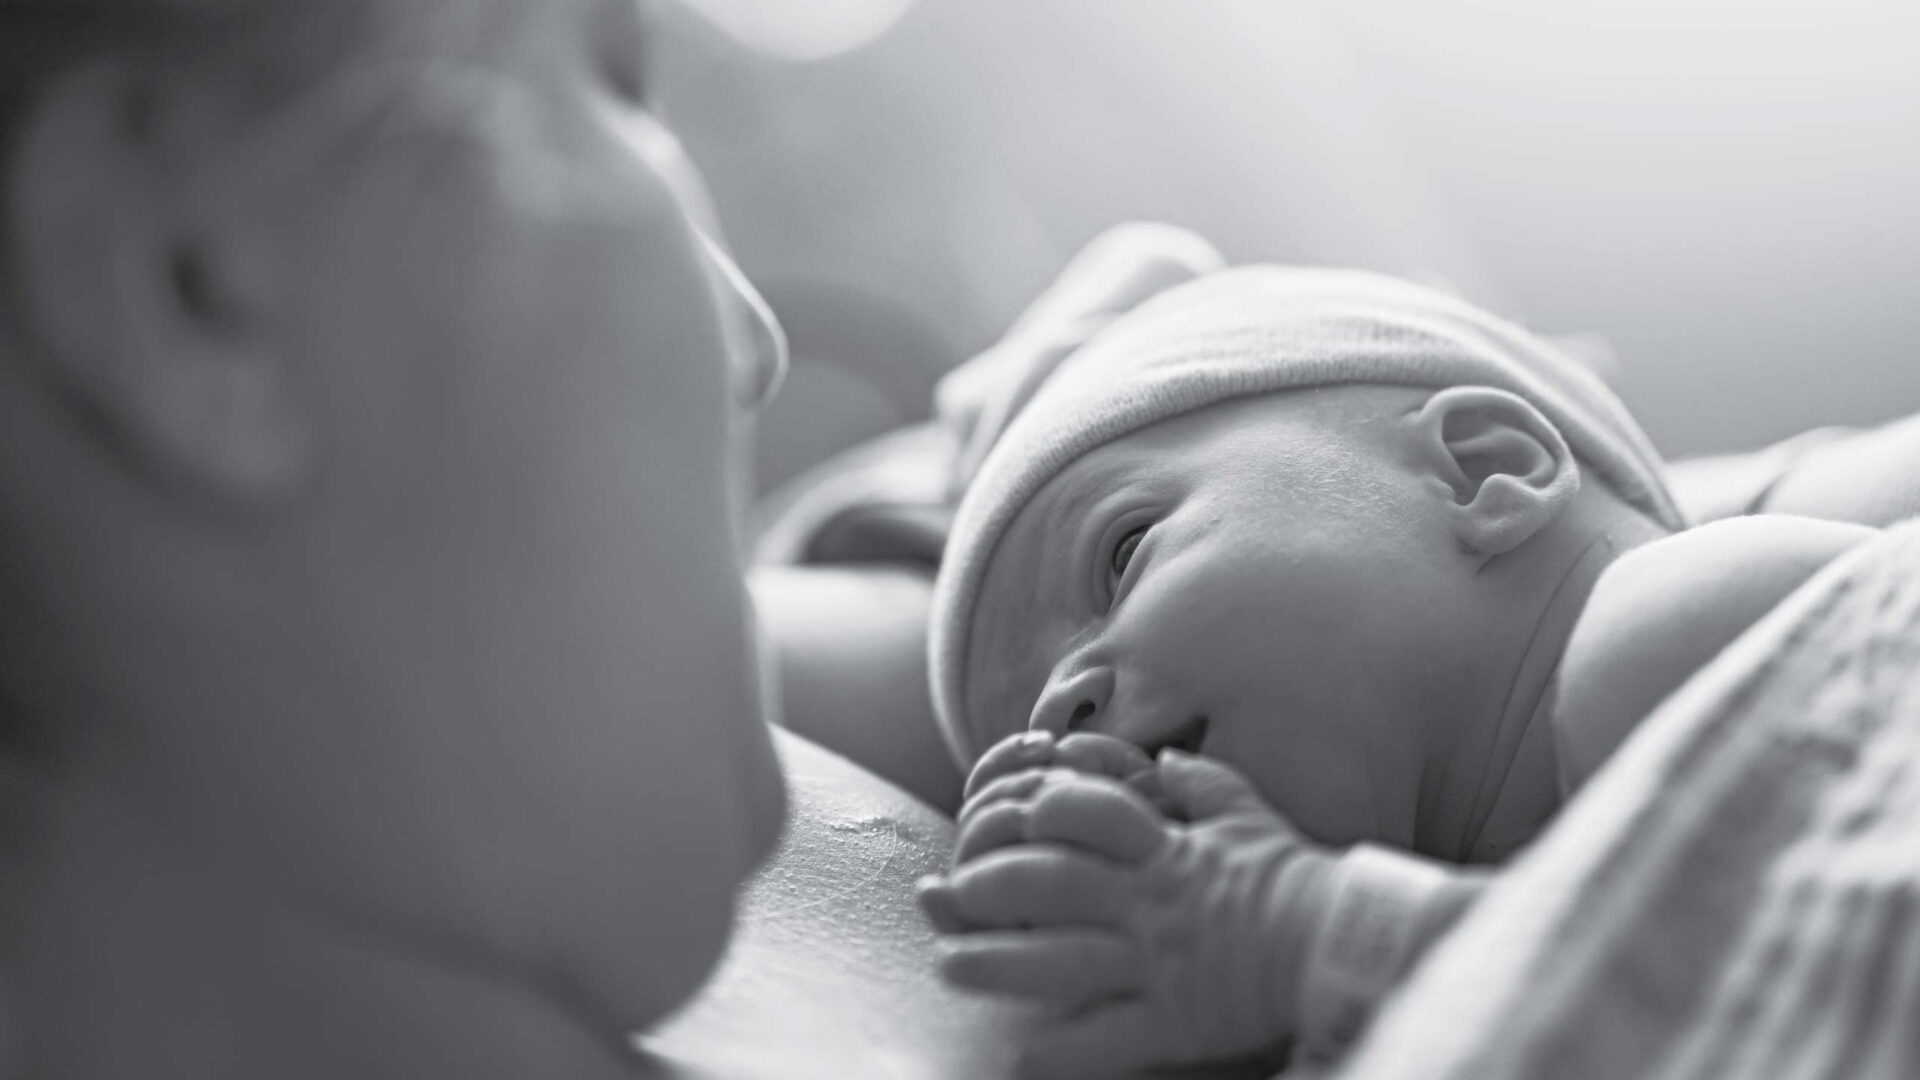 Our moms and babies deserve the best care at Peace Arch Hospital